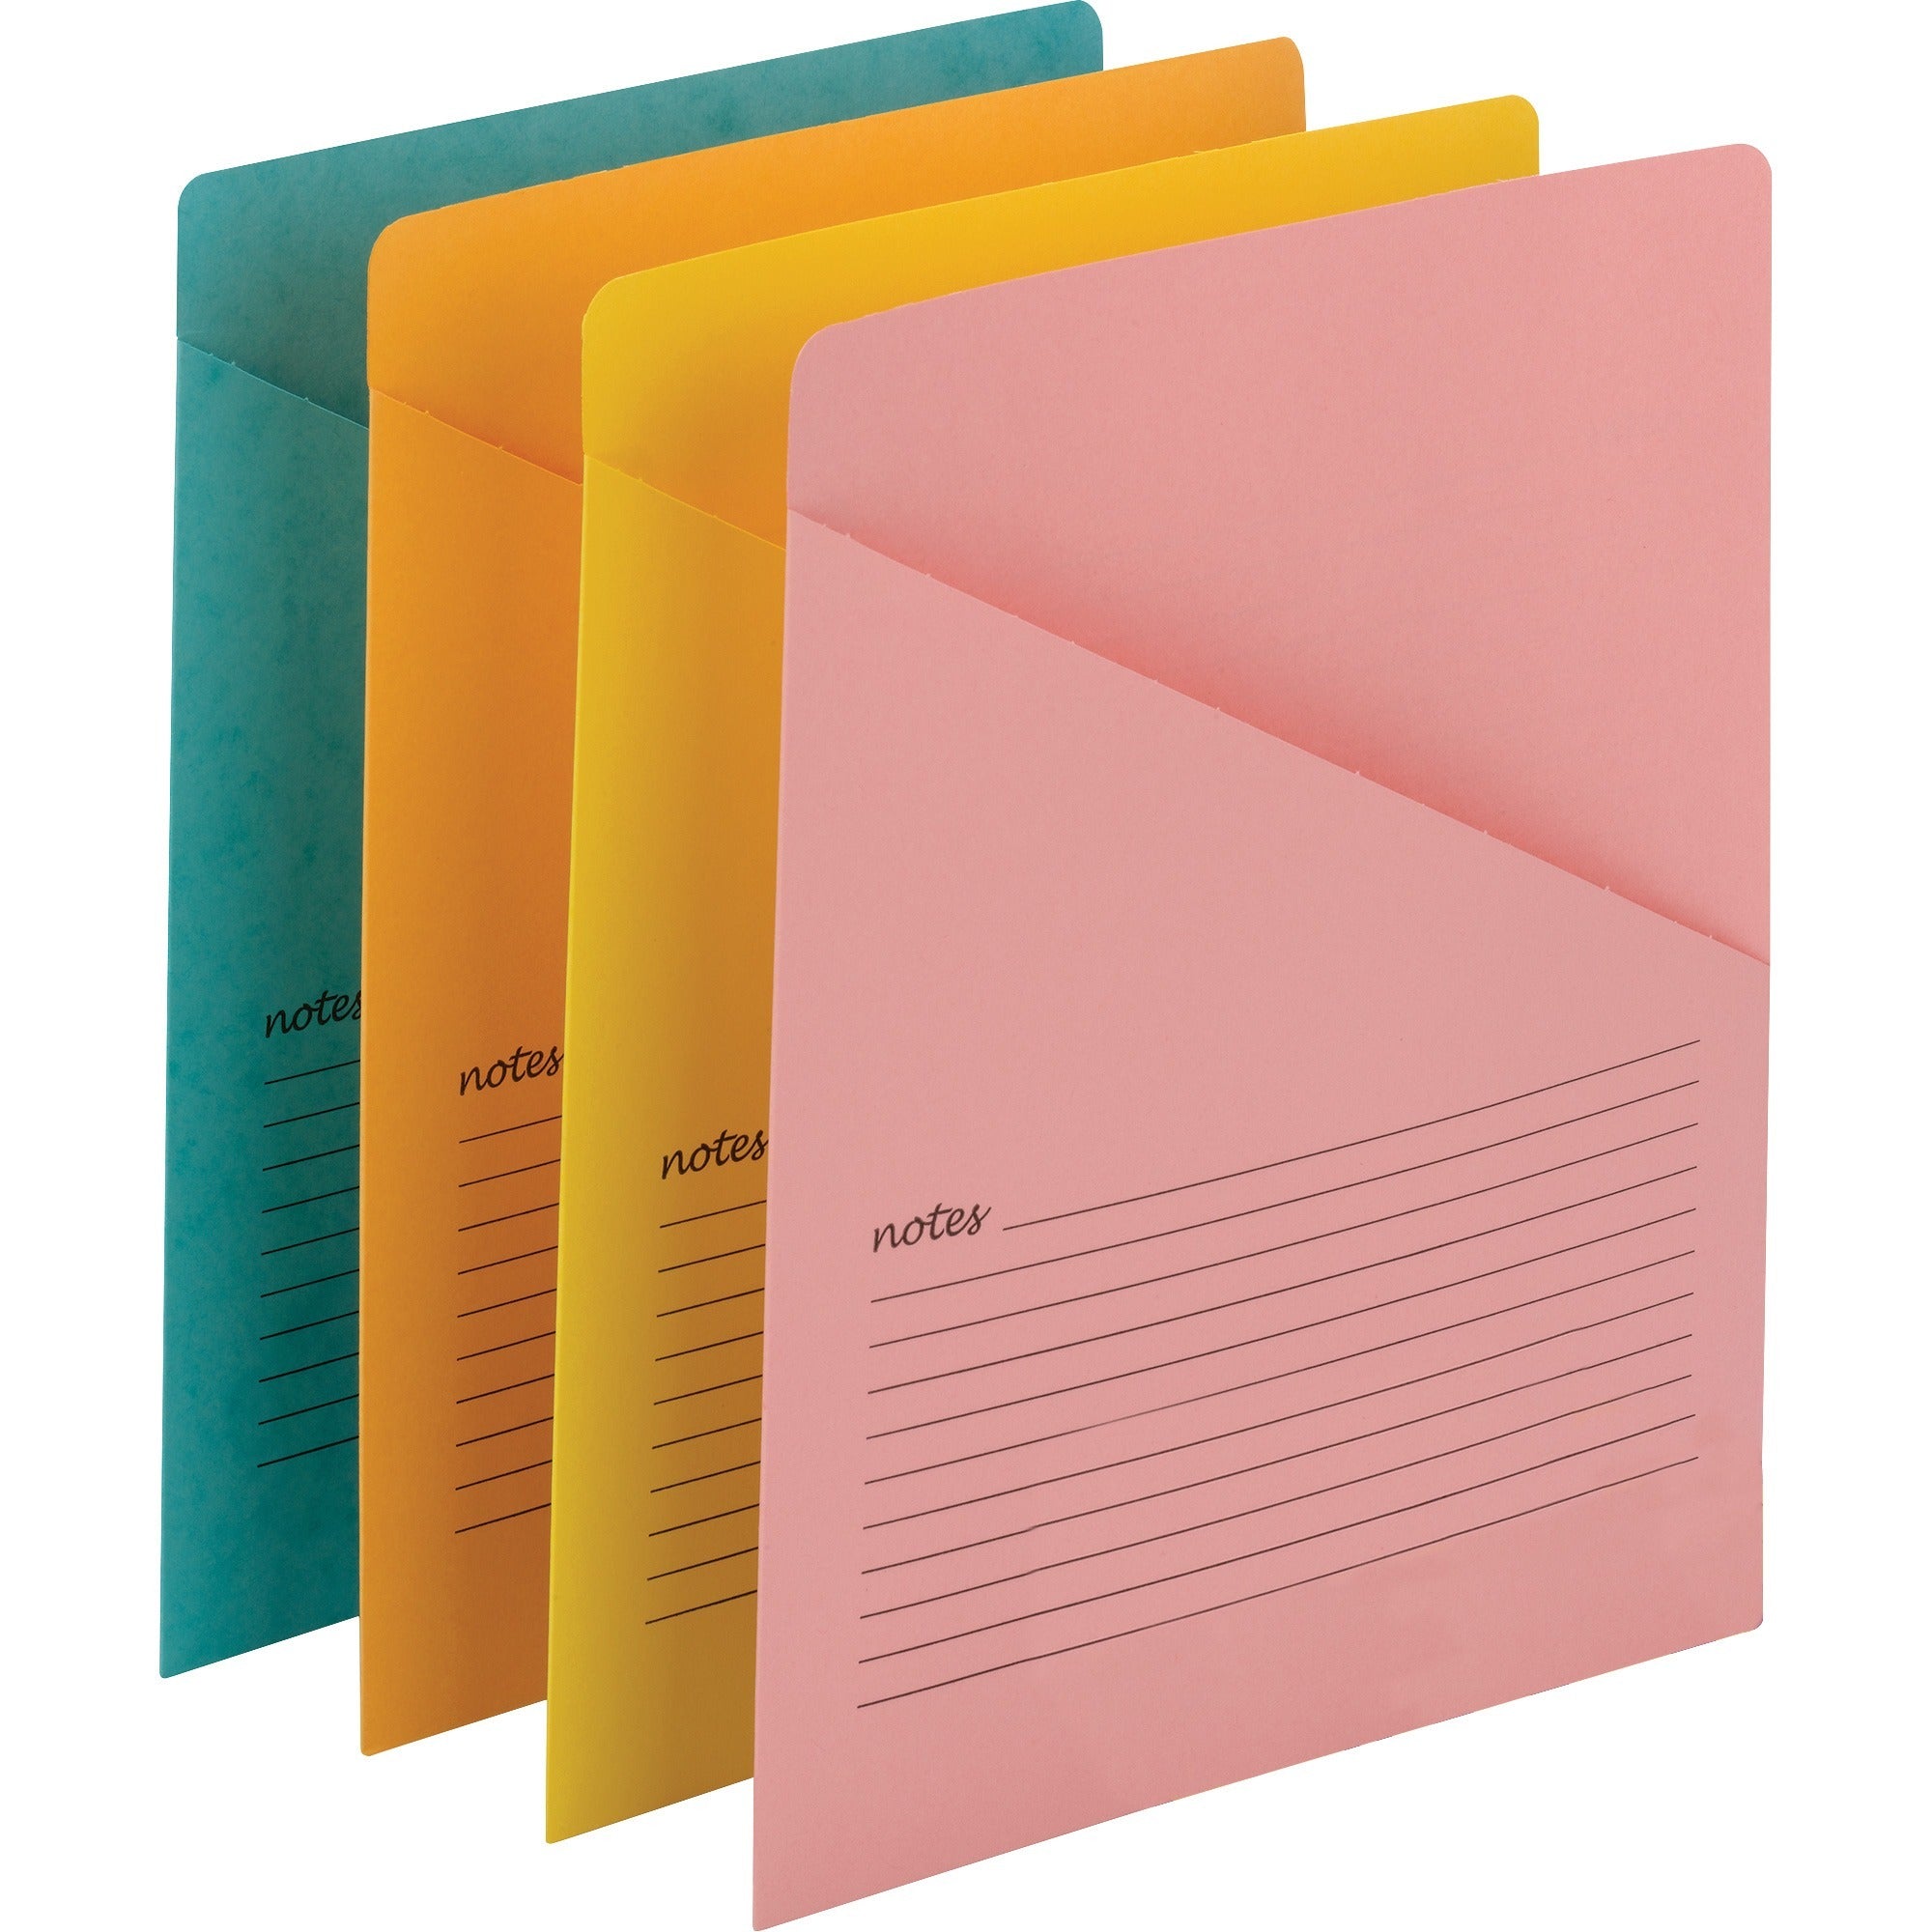 smead-organized-up-recycled-file-jacket-aqua-goldenrod-pink-yellow-10%-recycled-12-pack_smd75427 - 1